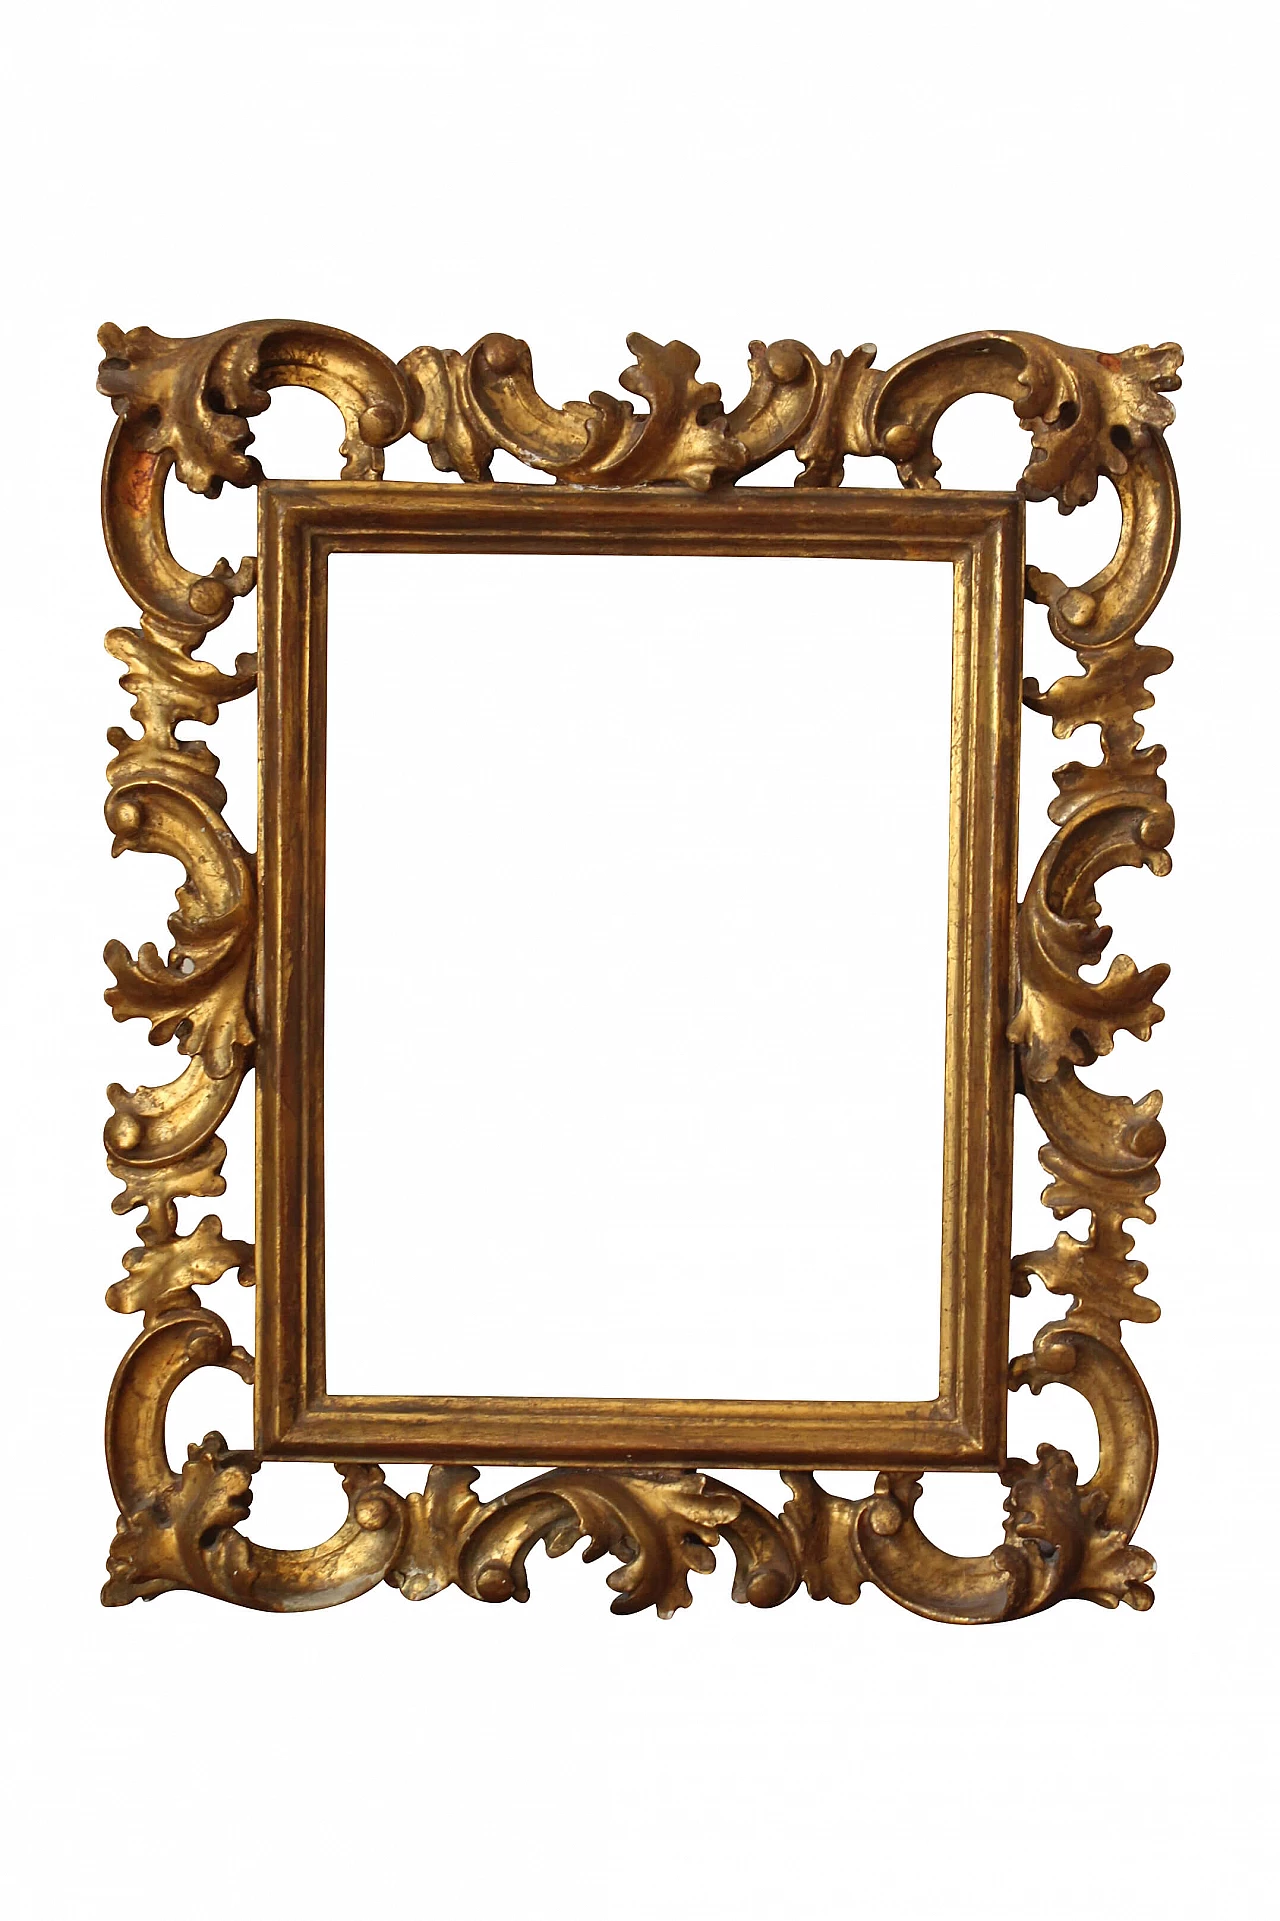 Wood and gilded plaster frame, 19th century 1223149